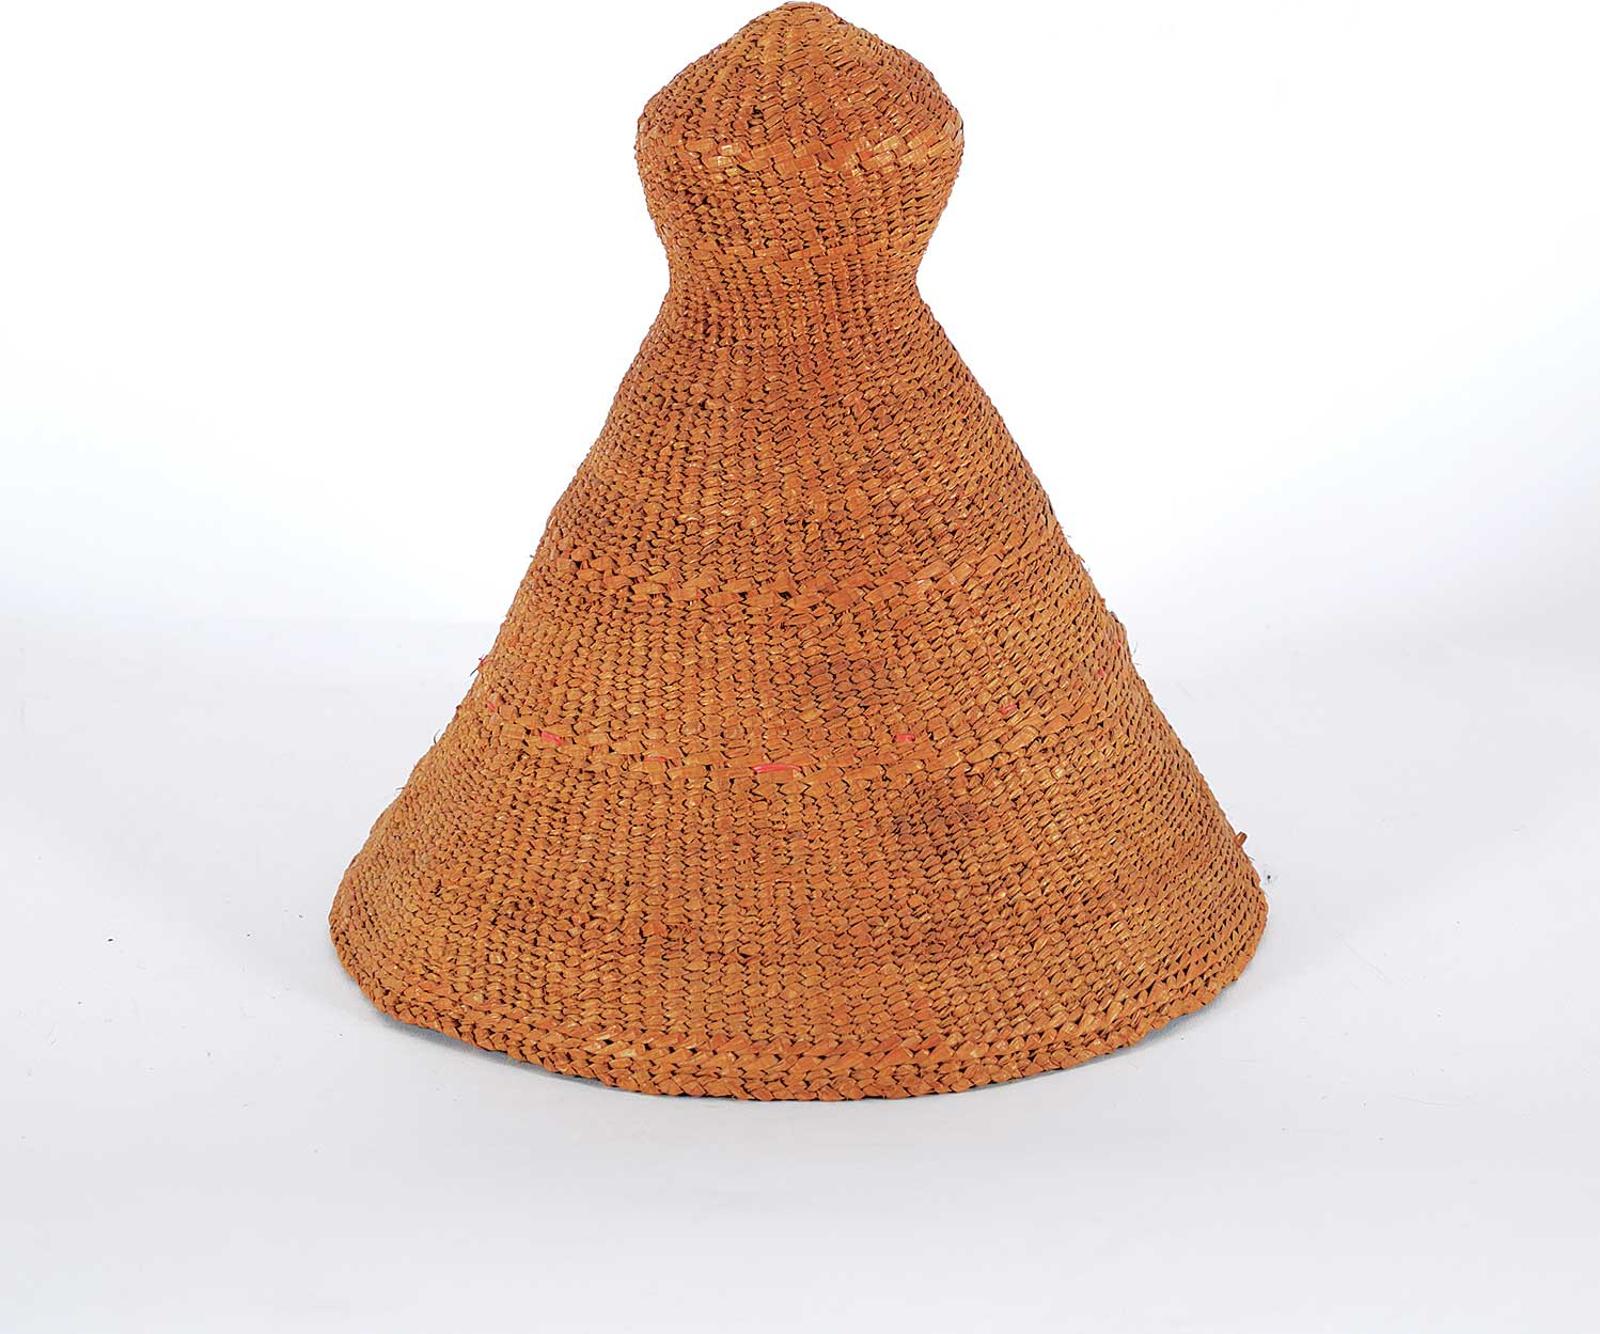 Northwest Coast First Nations School - Contemporary Nootka Bulbed Rain Hat with Red Stripe at Centre